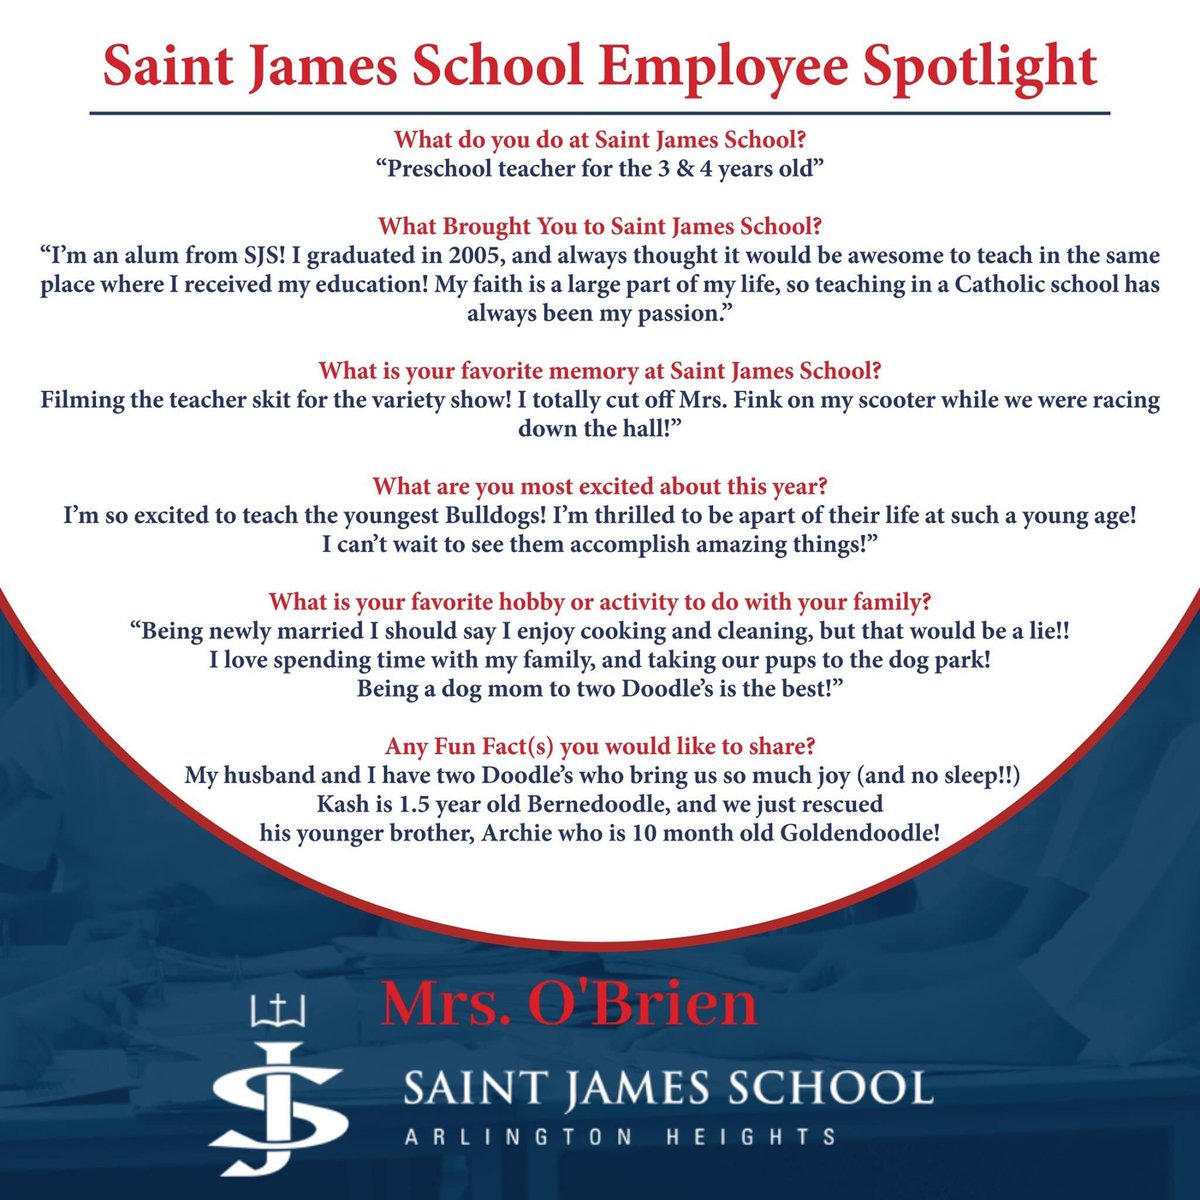 Did you know one of our Preschool teachers is a Saint James School Alumna? Get to know our PreK 3 & 4 teacher, Mrs. O'Brien! #FindAWay